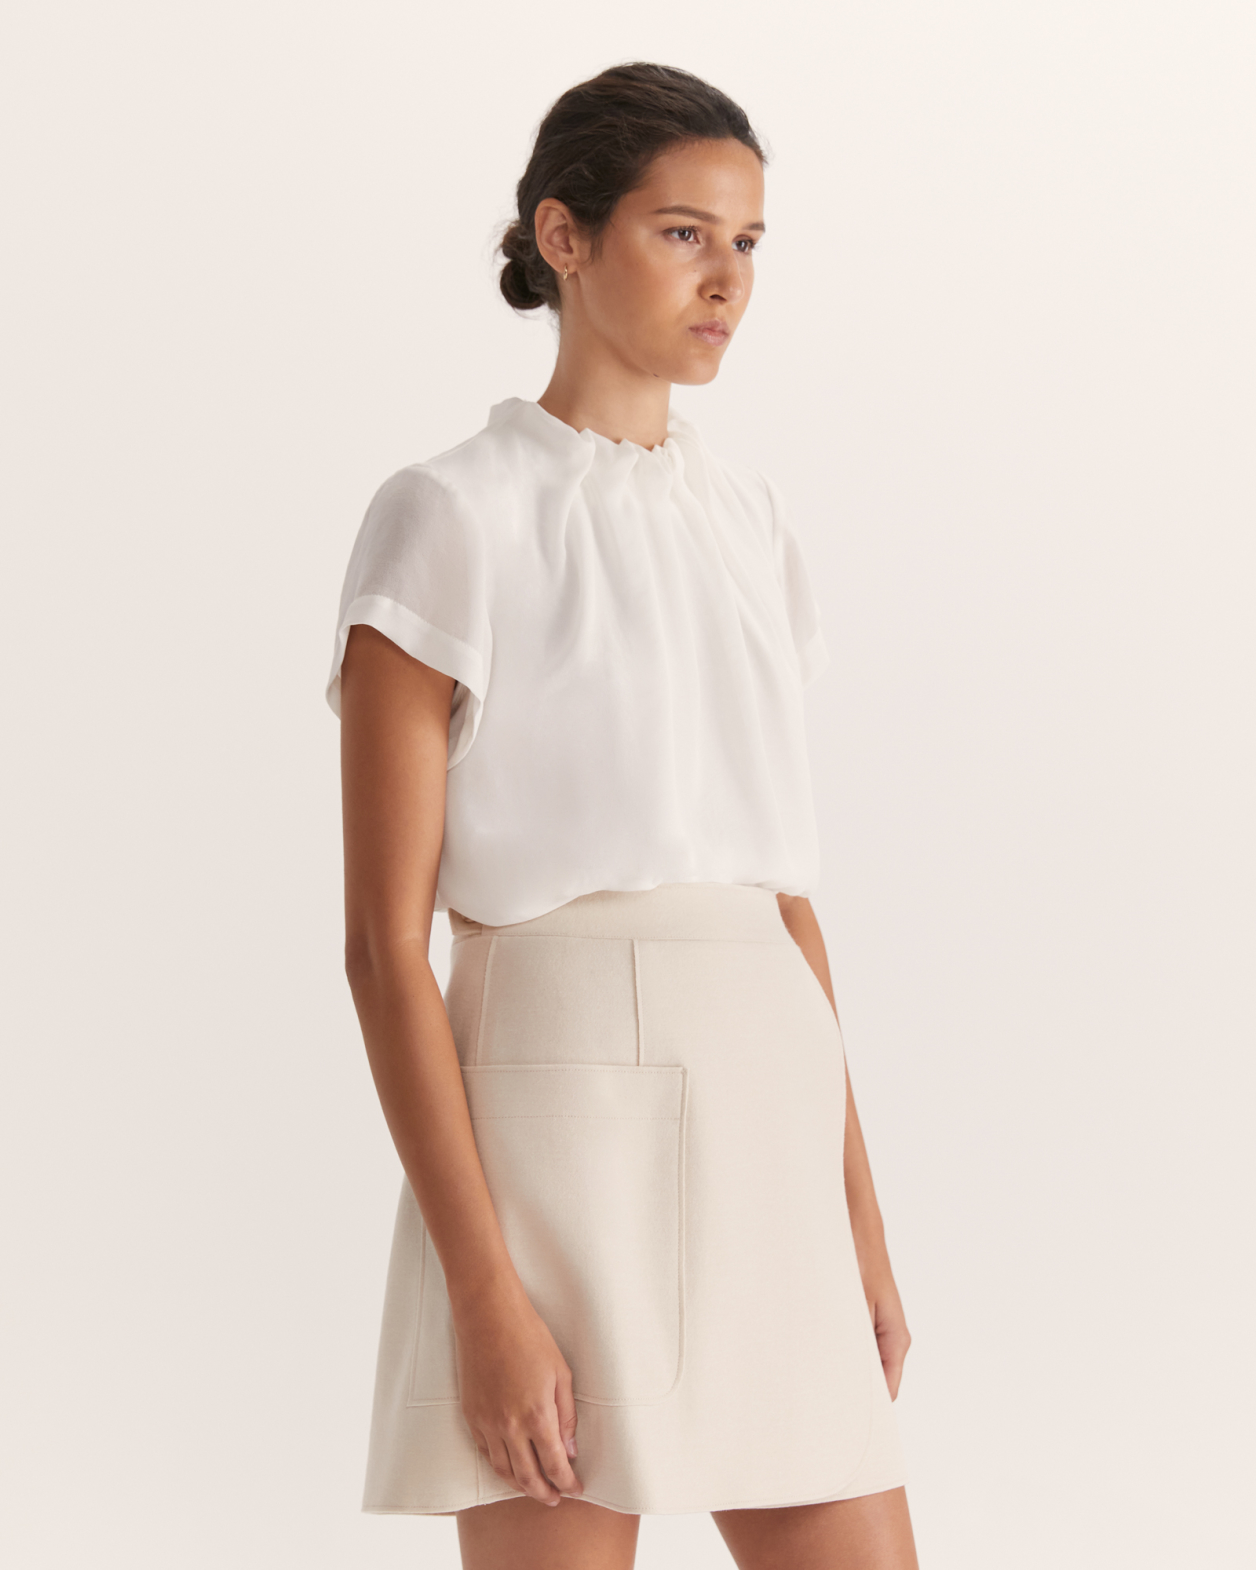 Willa High Neck Short Sleeve Top in OFF WHITE